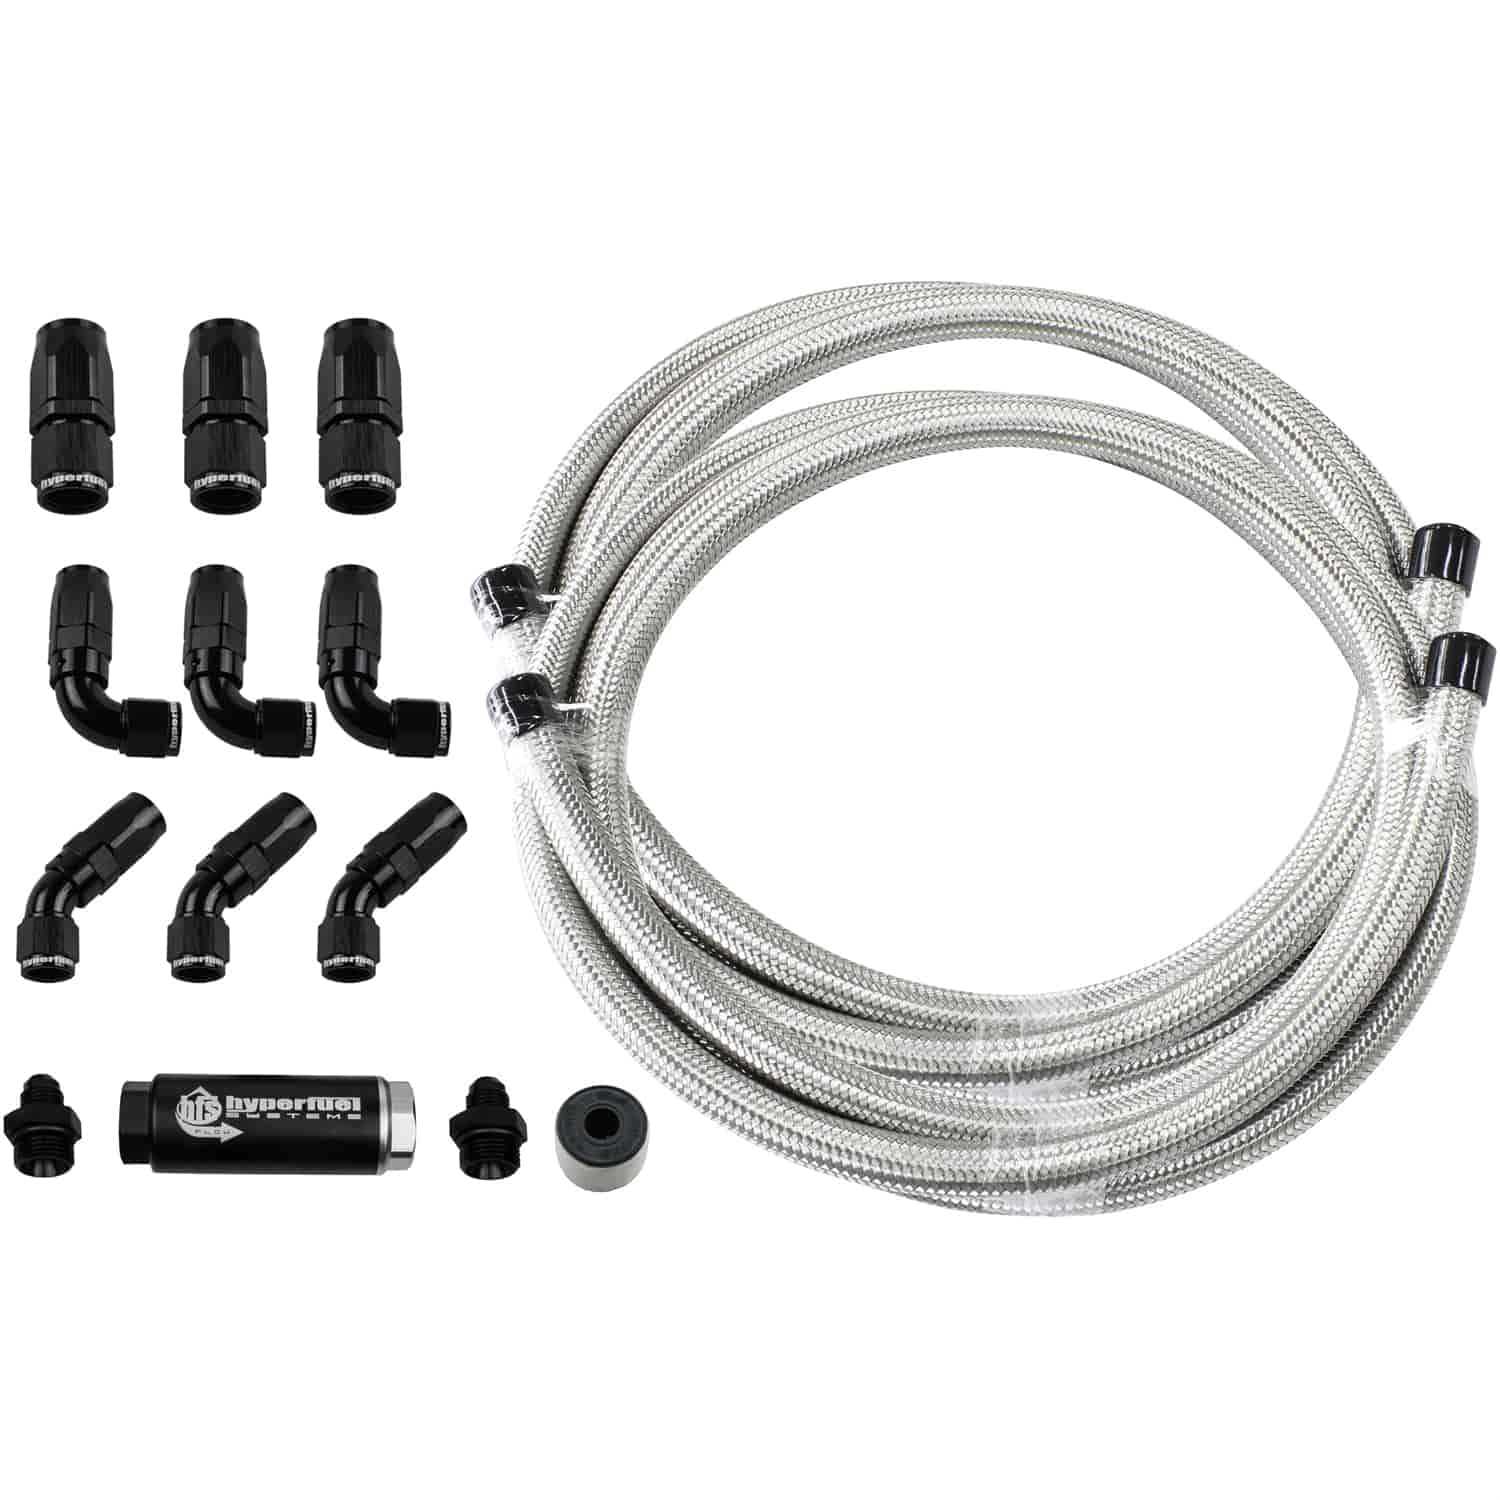 Stainless Steel Braided Hose Kit Natural 40 ft. -6 AN